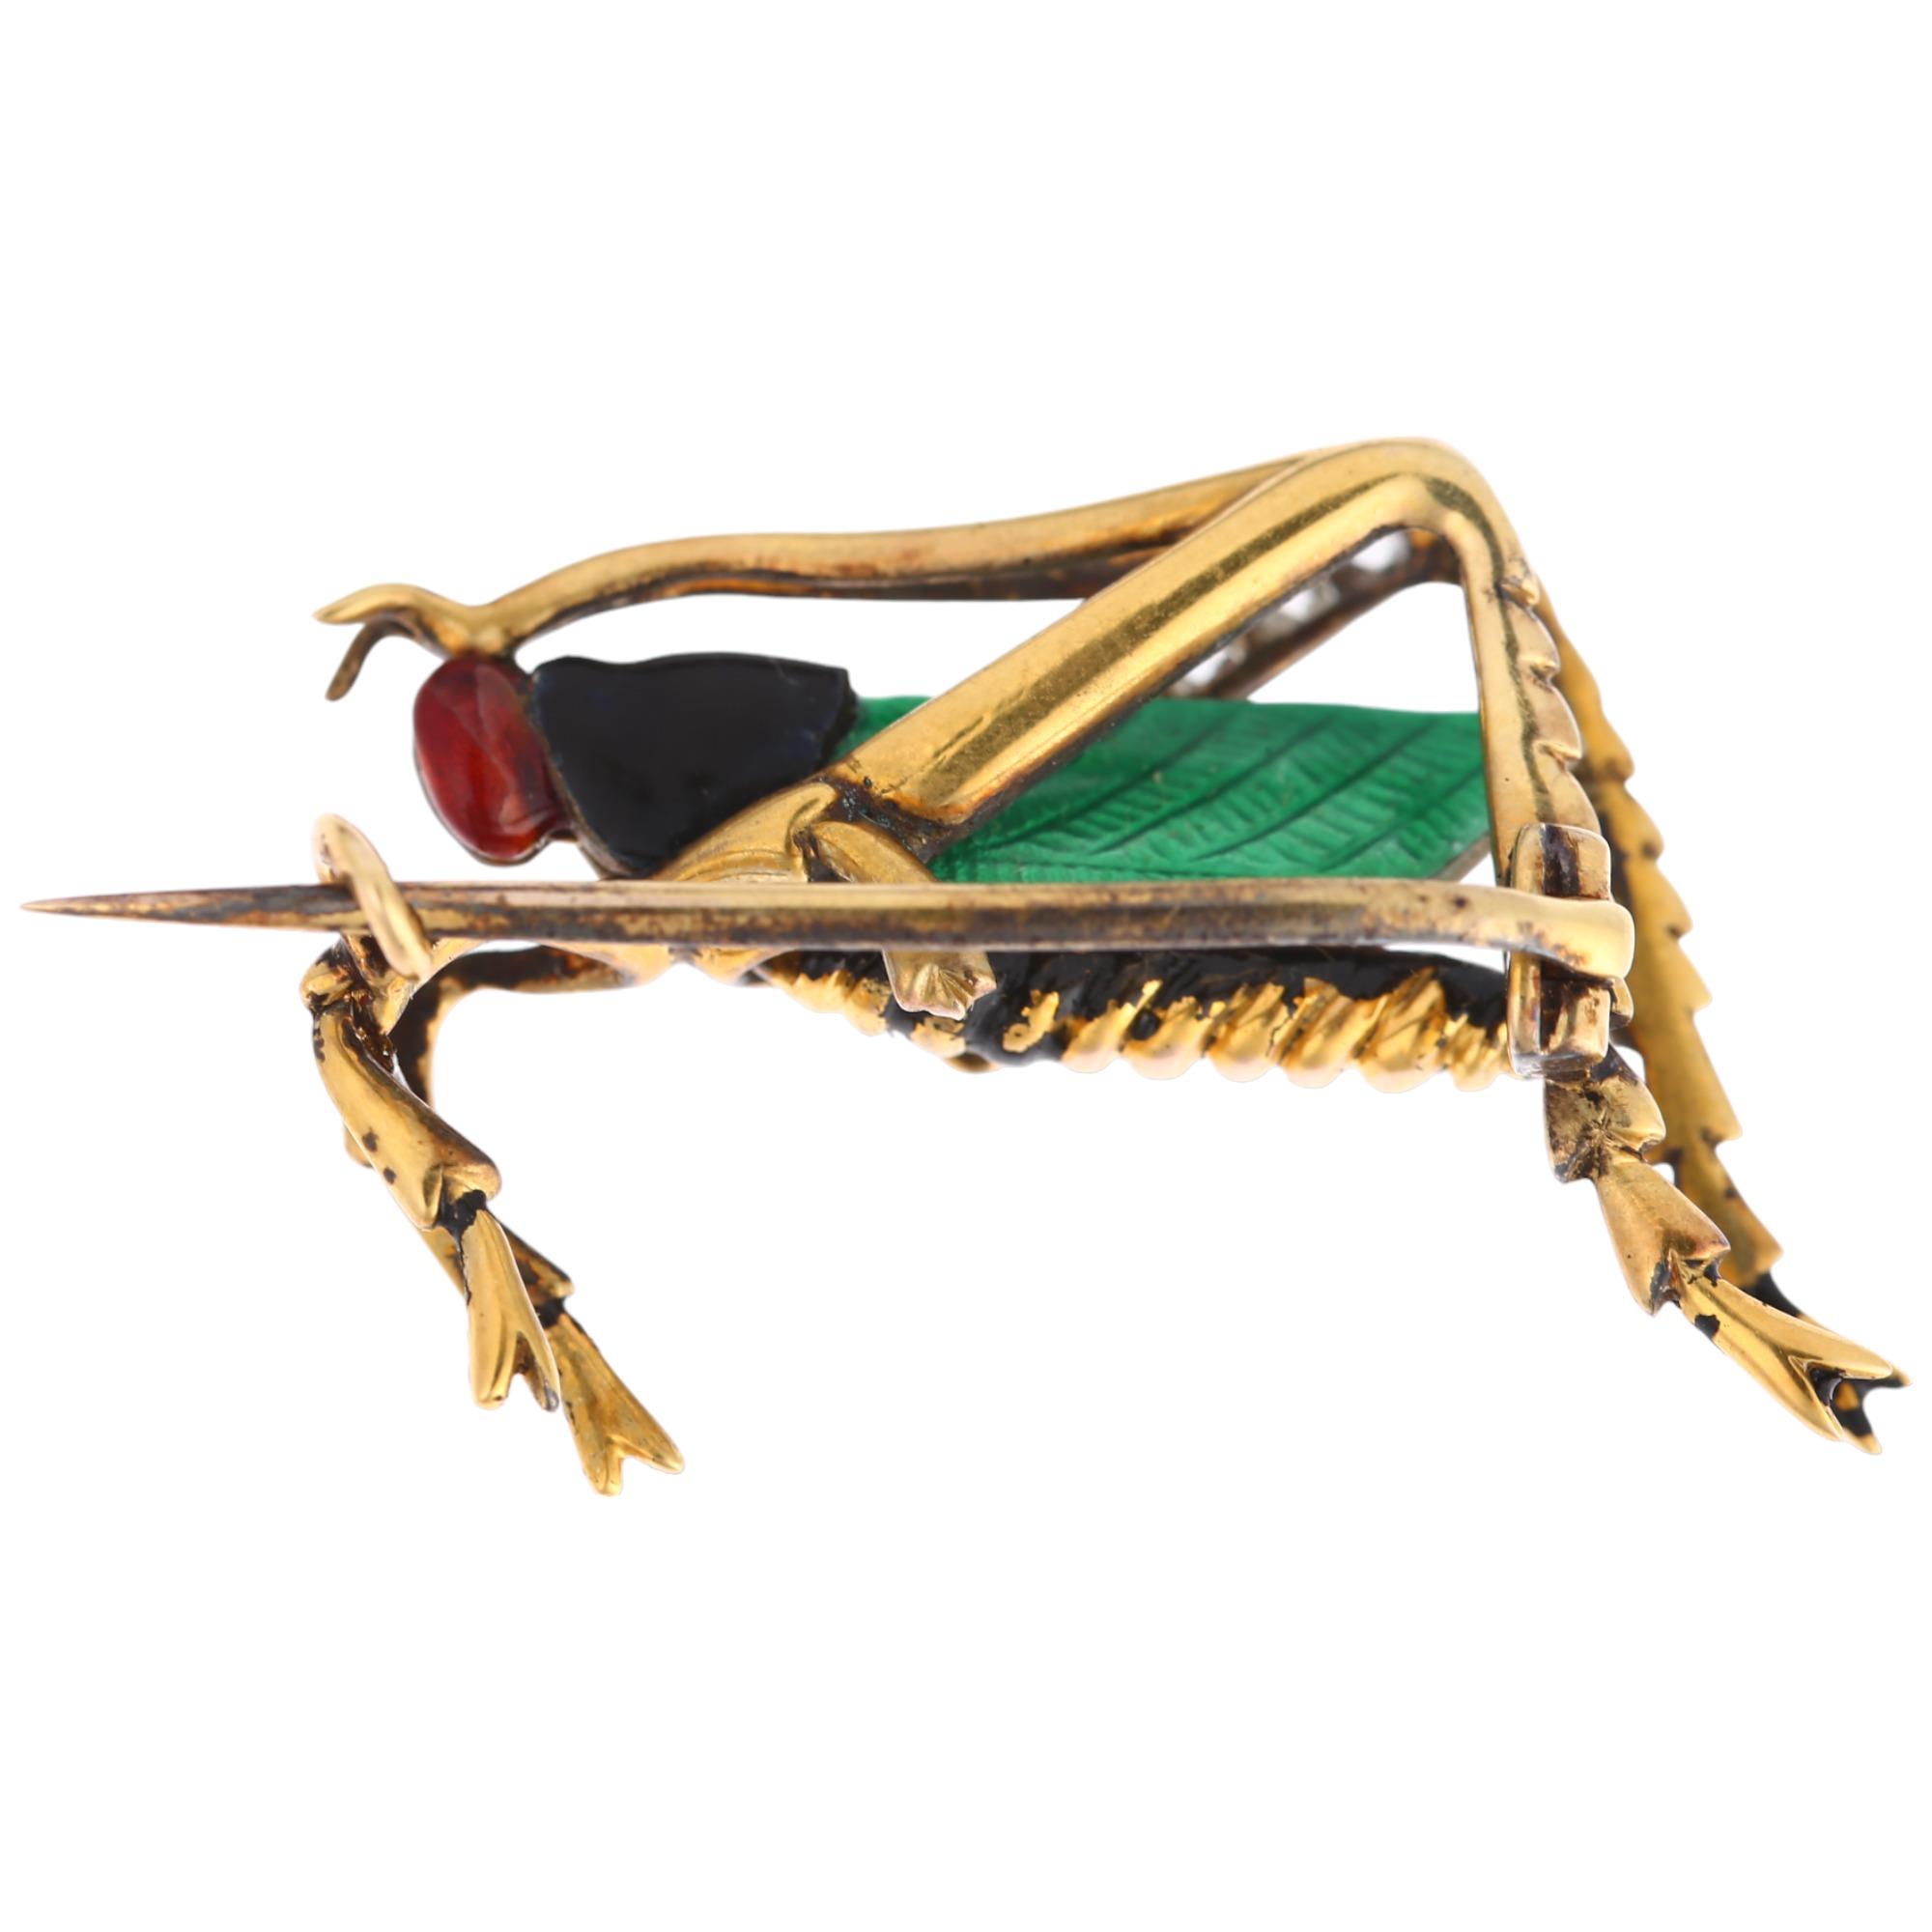 A diamond and enamel figural grasshopper brooch, early/mid-20th century, unmarked yellow metal - Image 3 of 4